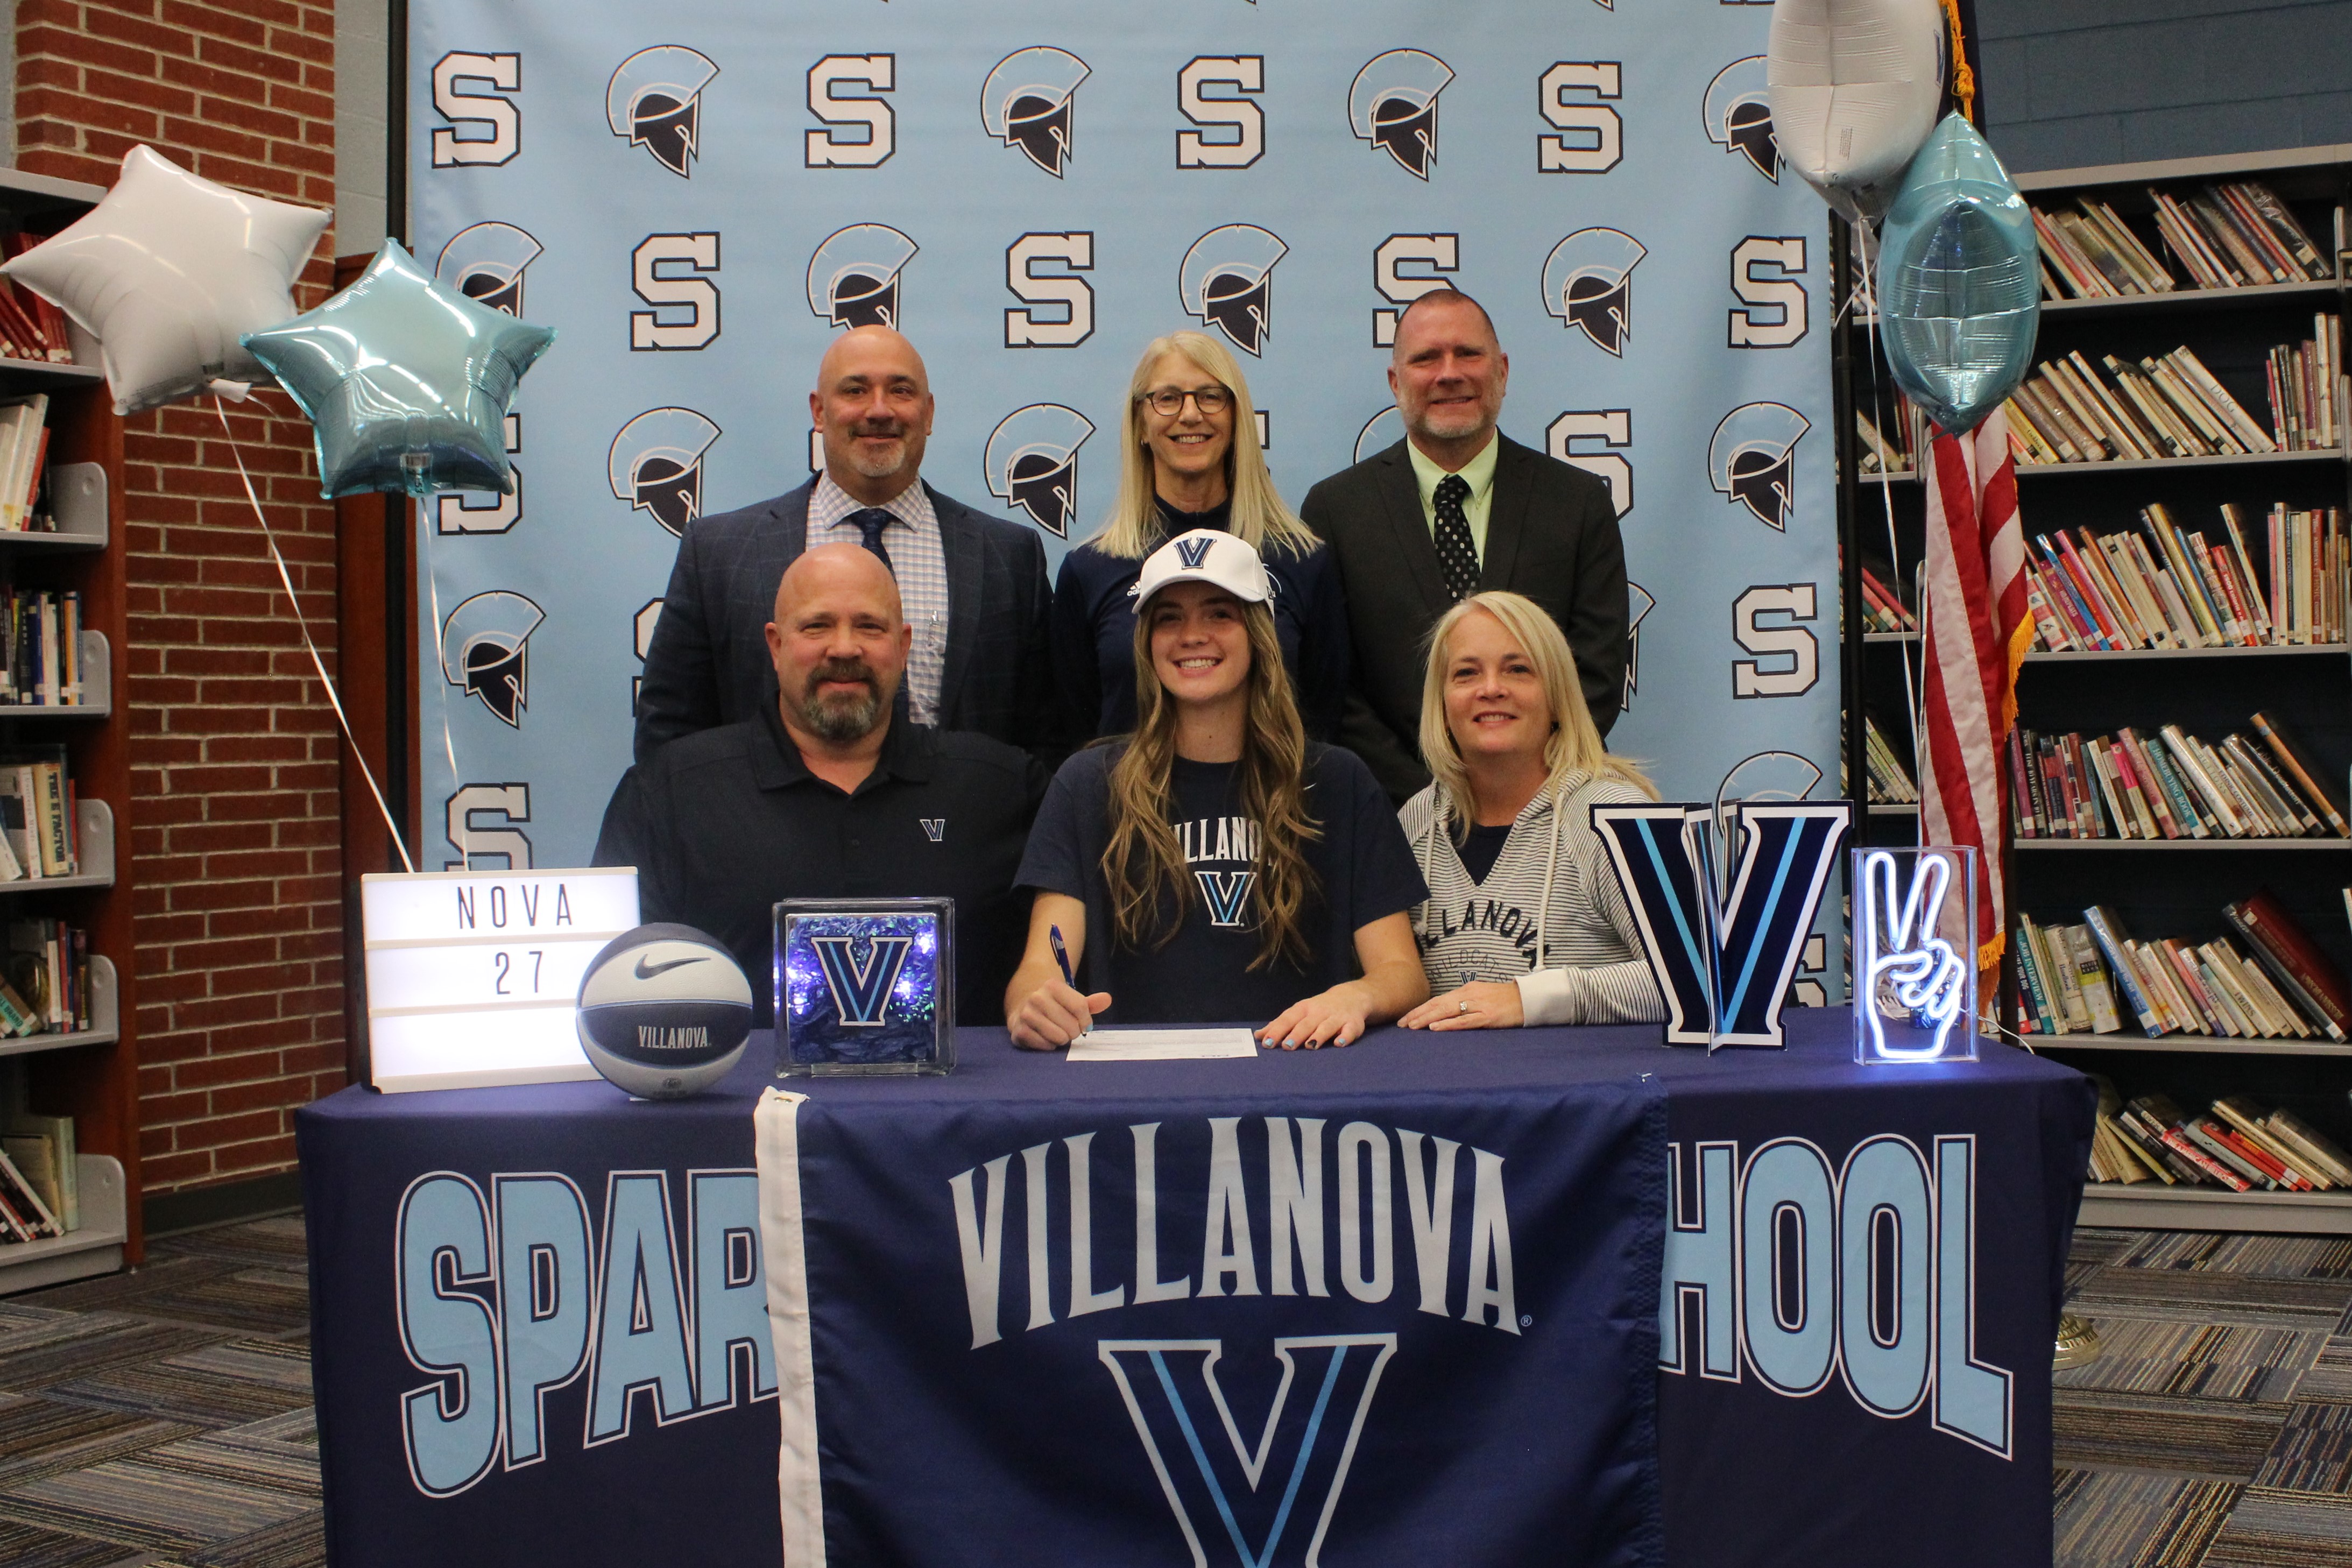 Brynn McCurry will continue her basketball career at Villanova.  Pictured are: Back row: Dr. Ed Lazzara, Principal; Cathy Wille, Head Coach and Steve Stoner, AD
Front Row: Matt McCurry, Brynn McCurry and Colleen McCurry